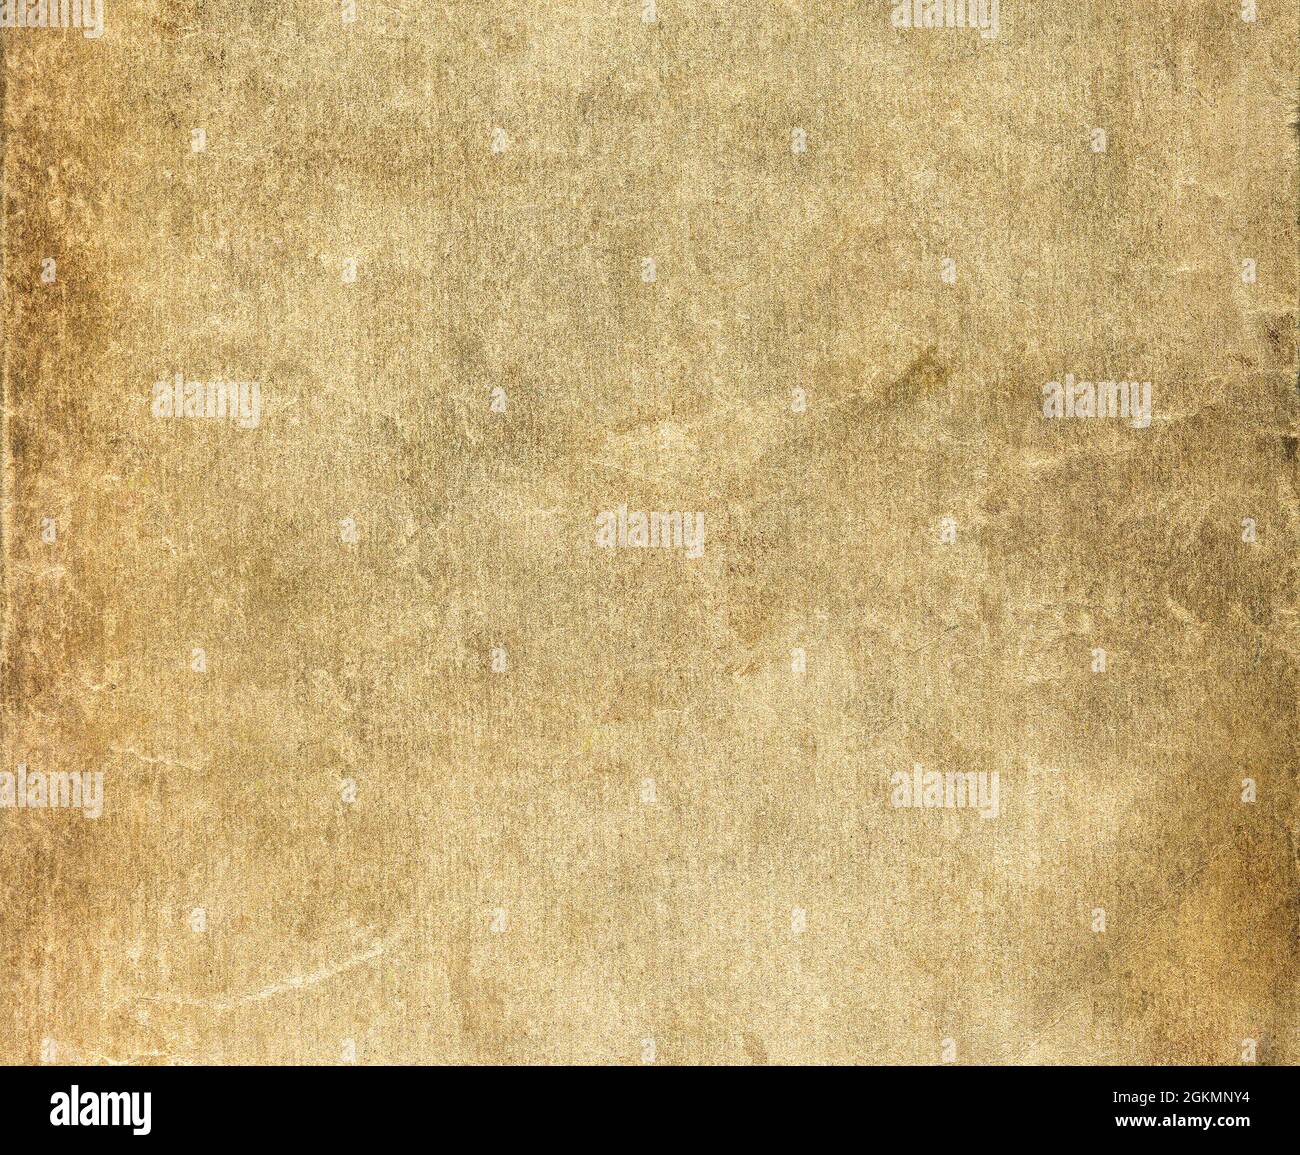 Old beige paper texture background with space for text Stock Photo